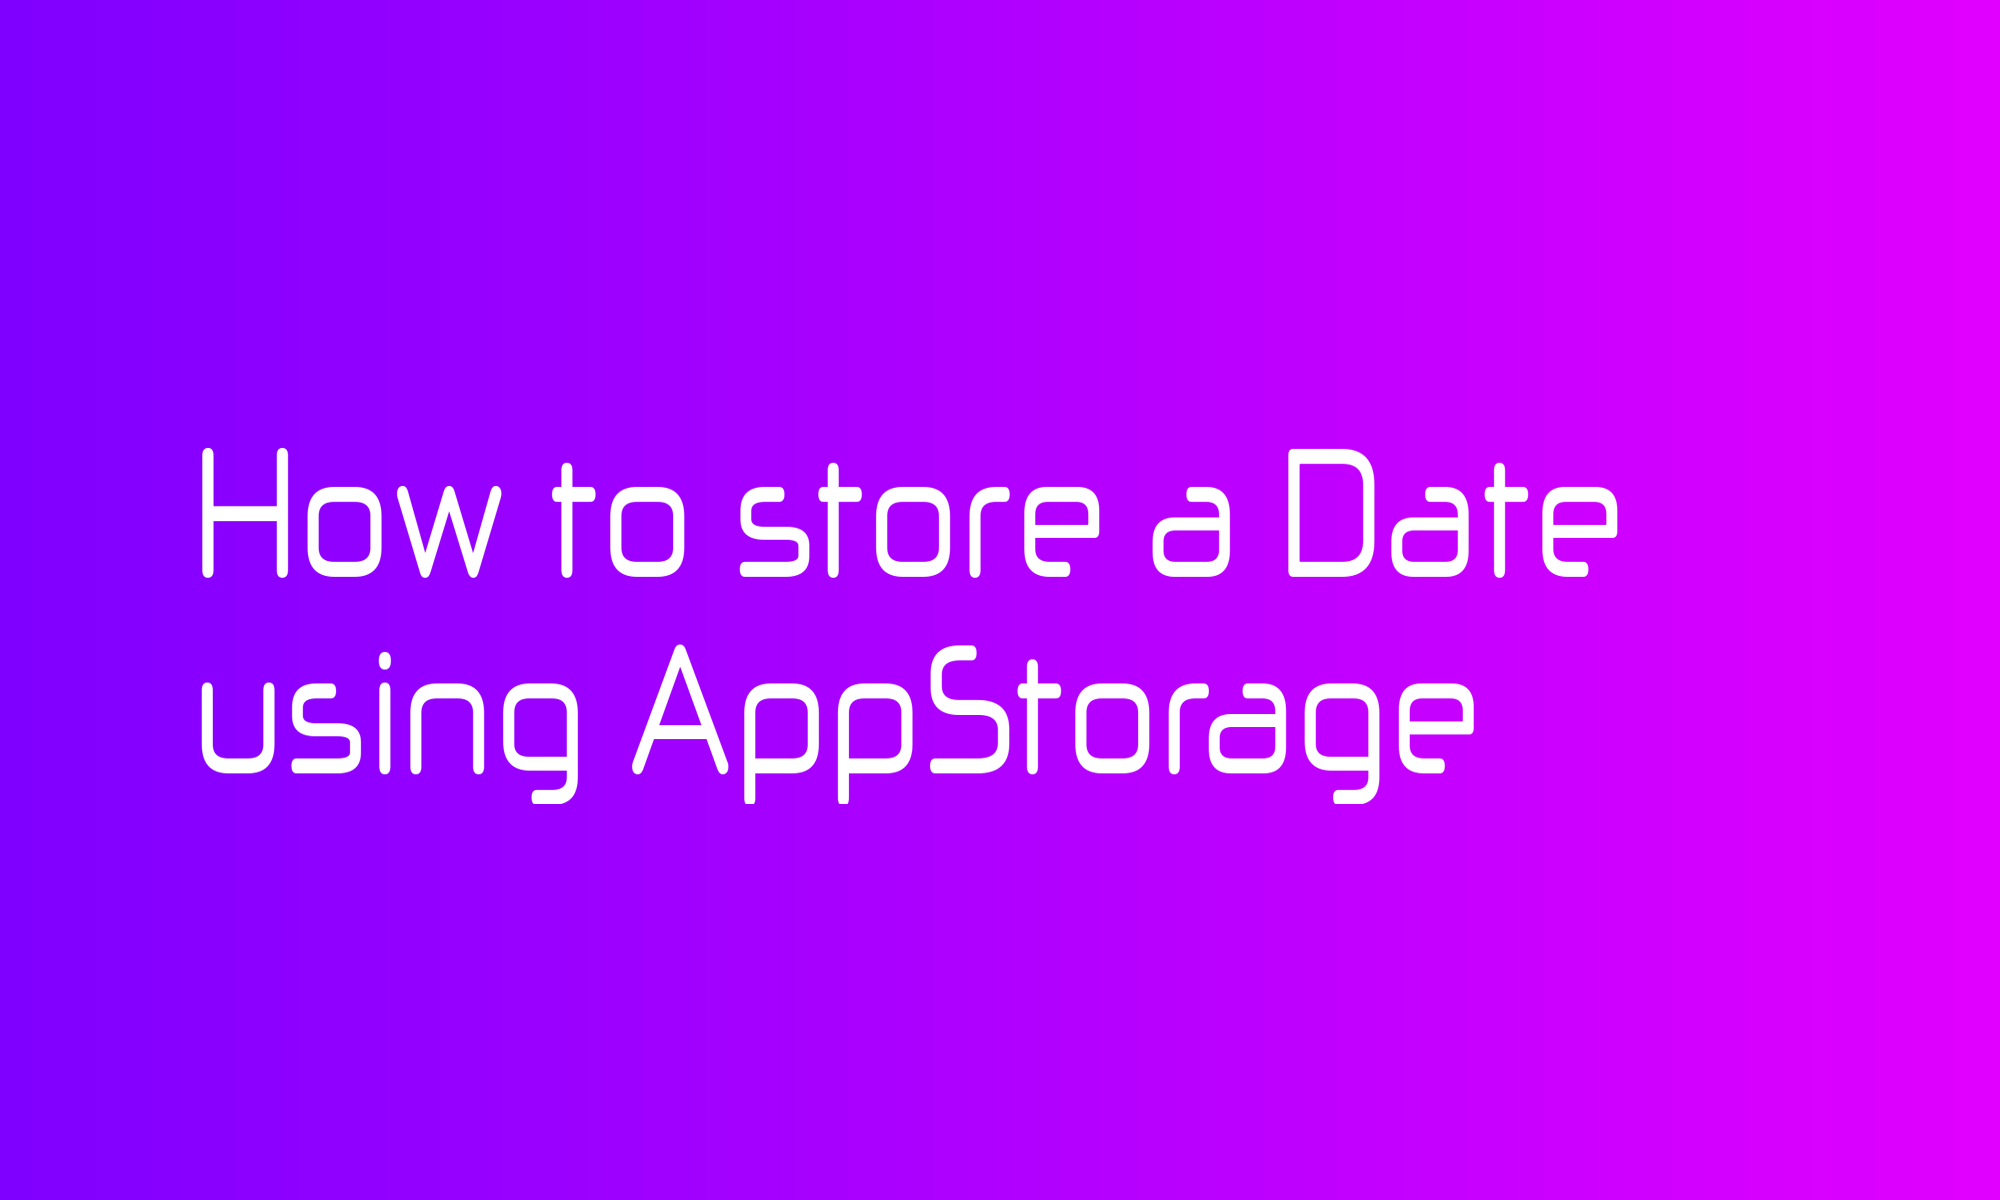 How to store a Date using AppStorage